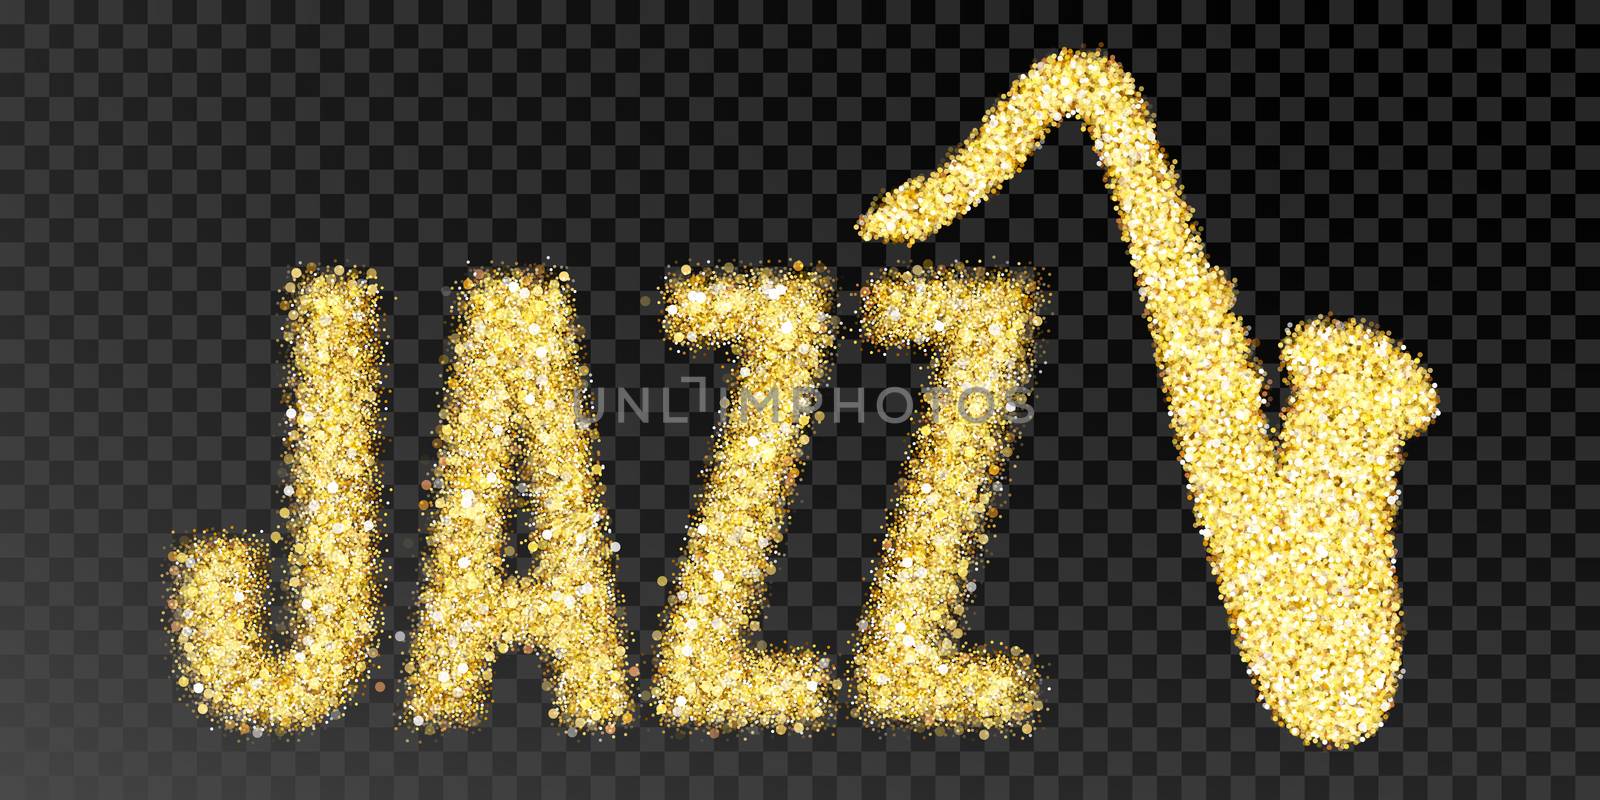 Gold glitter Inscription jazz and saxophone. Golden sparcle word jazz on black transparent background. Amber particles gold confetti musical instrument.